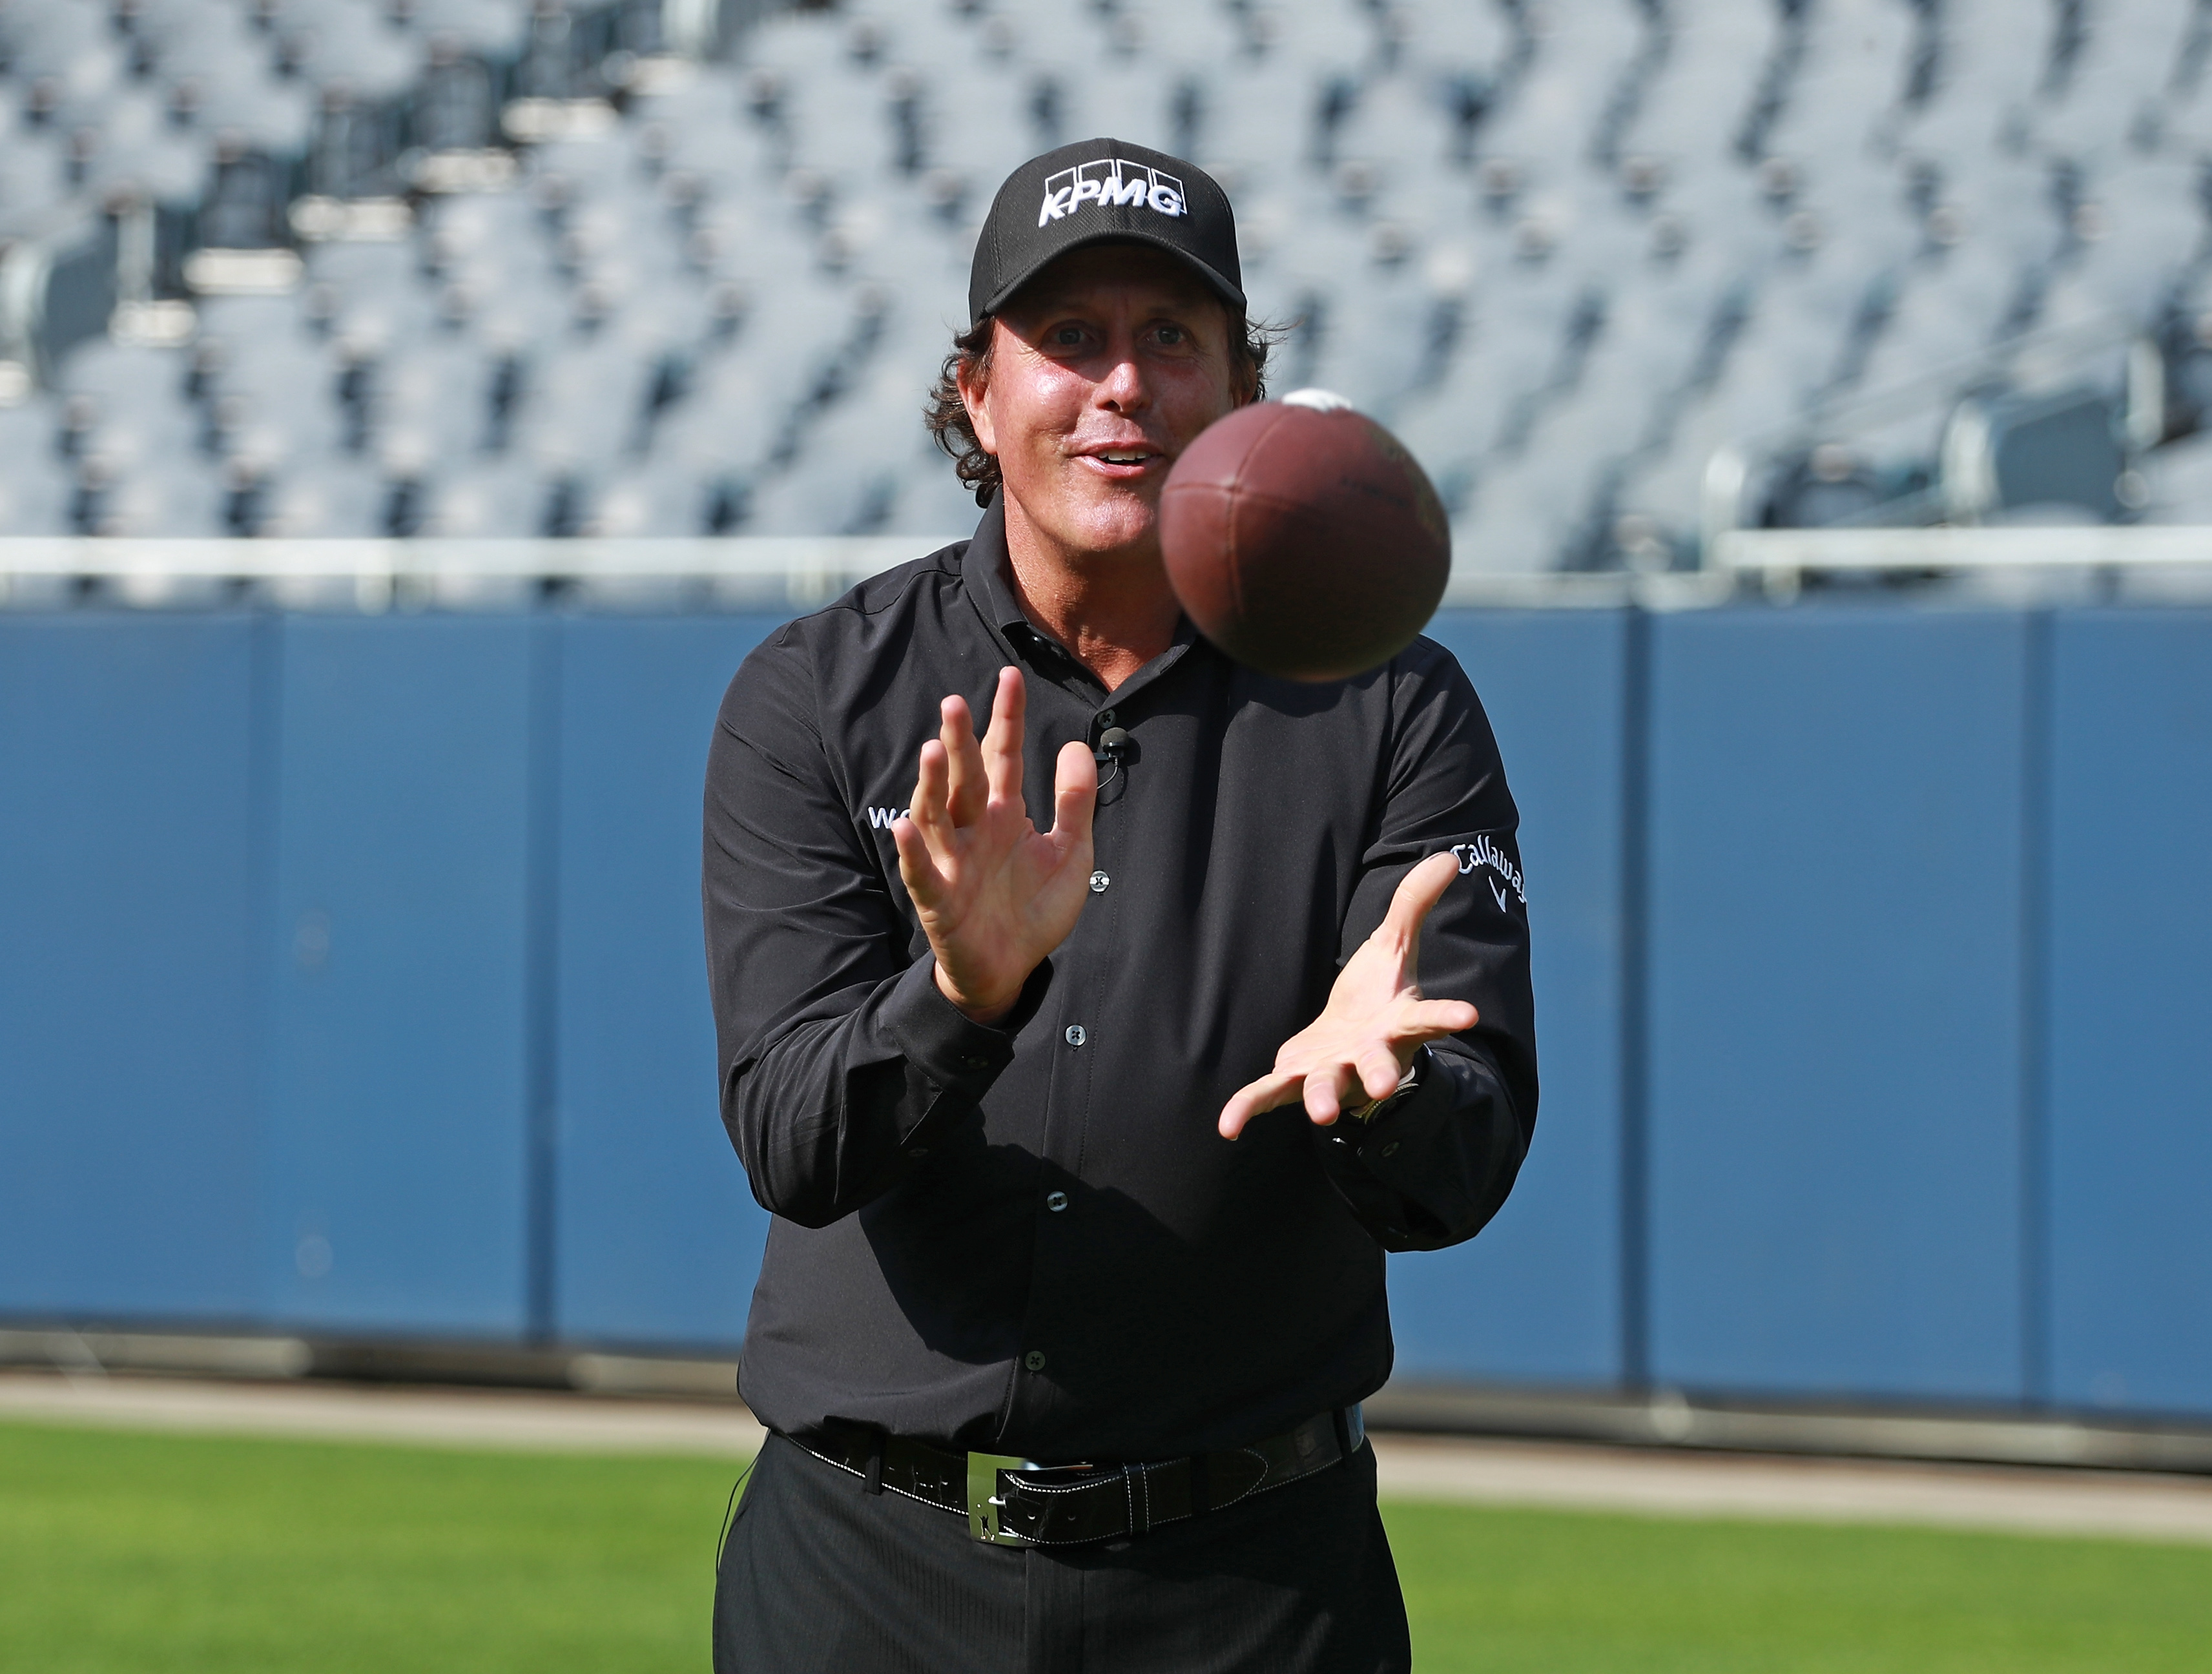 Phil Mickelson catches a football